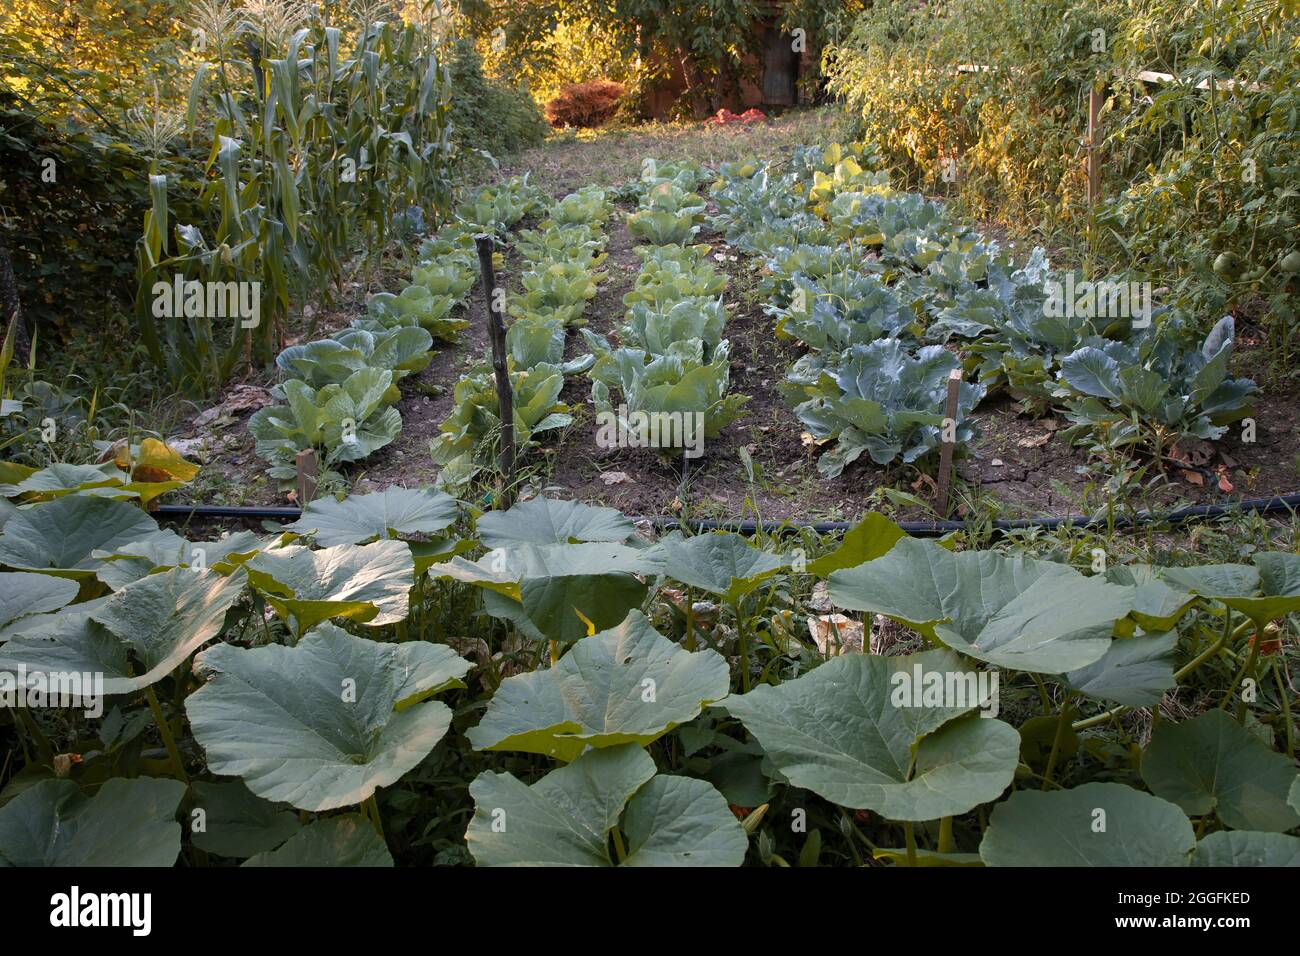 Cabbages and other plants growing in a vegetable garden Stock Photo